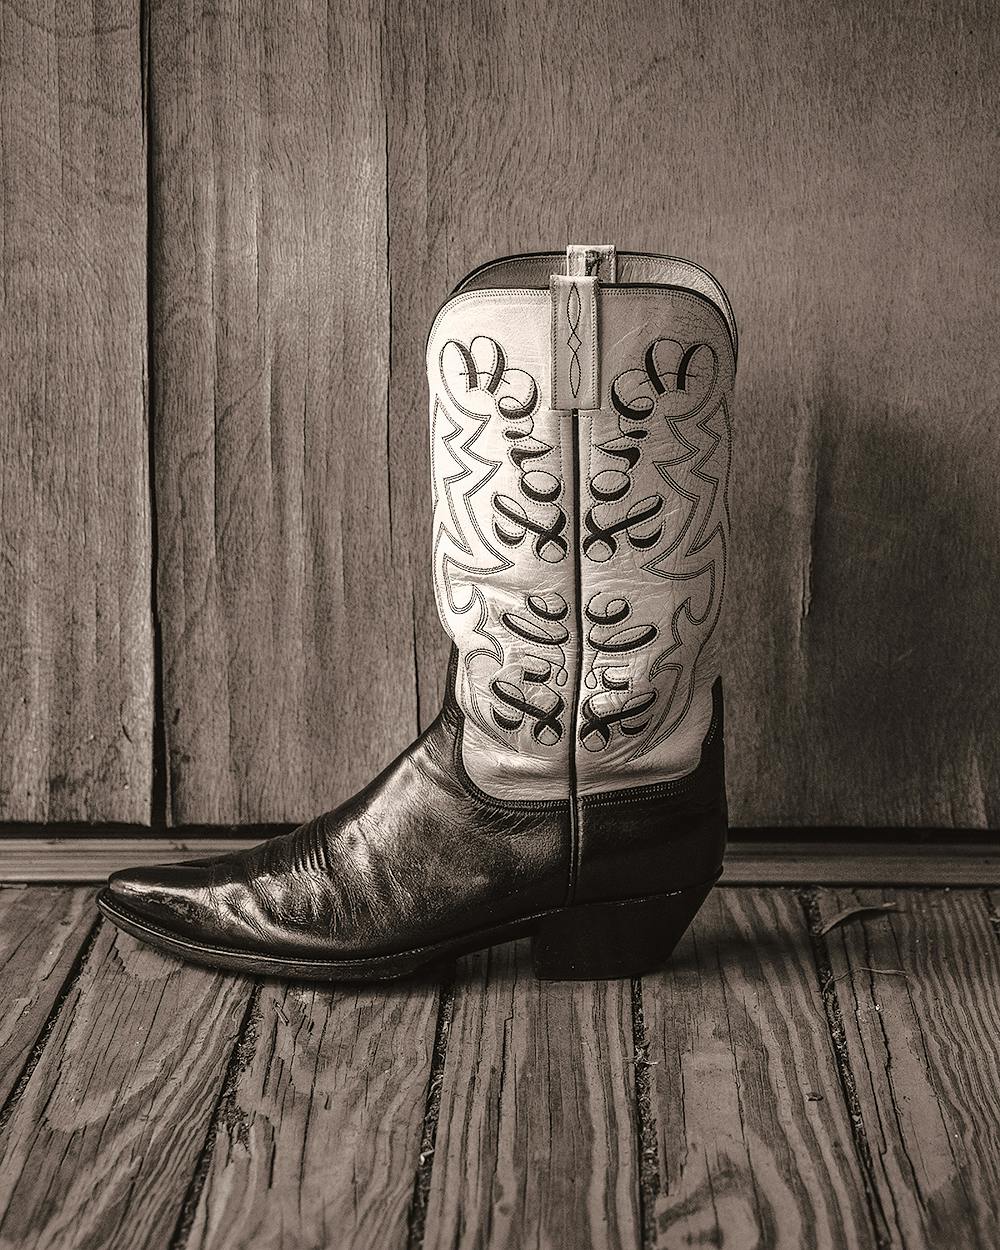 Lyle Lovett's cowboy boots, with his name on them, designed by his wife. 